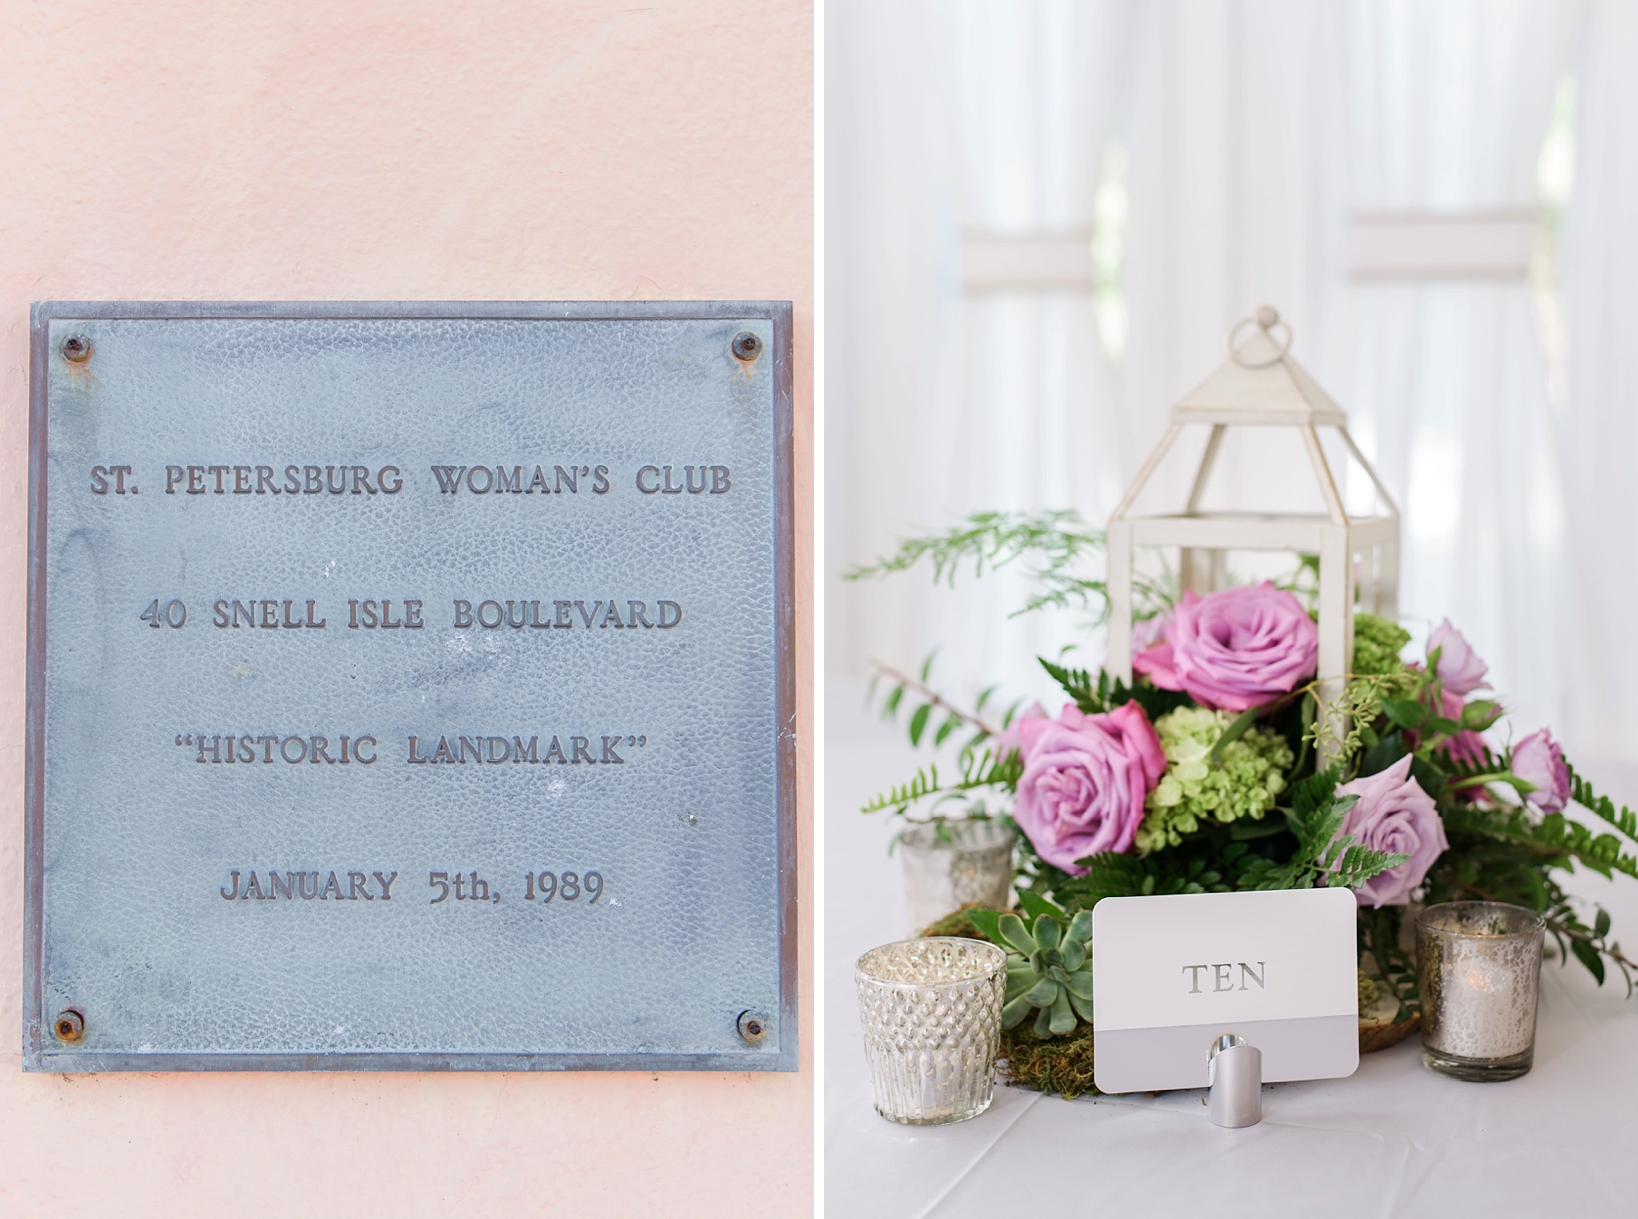 Building plaque and floral centerpieces with lantern and candles